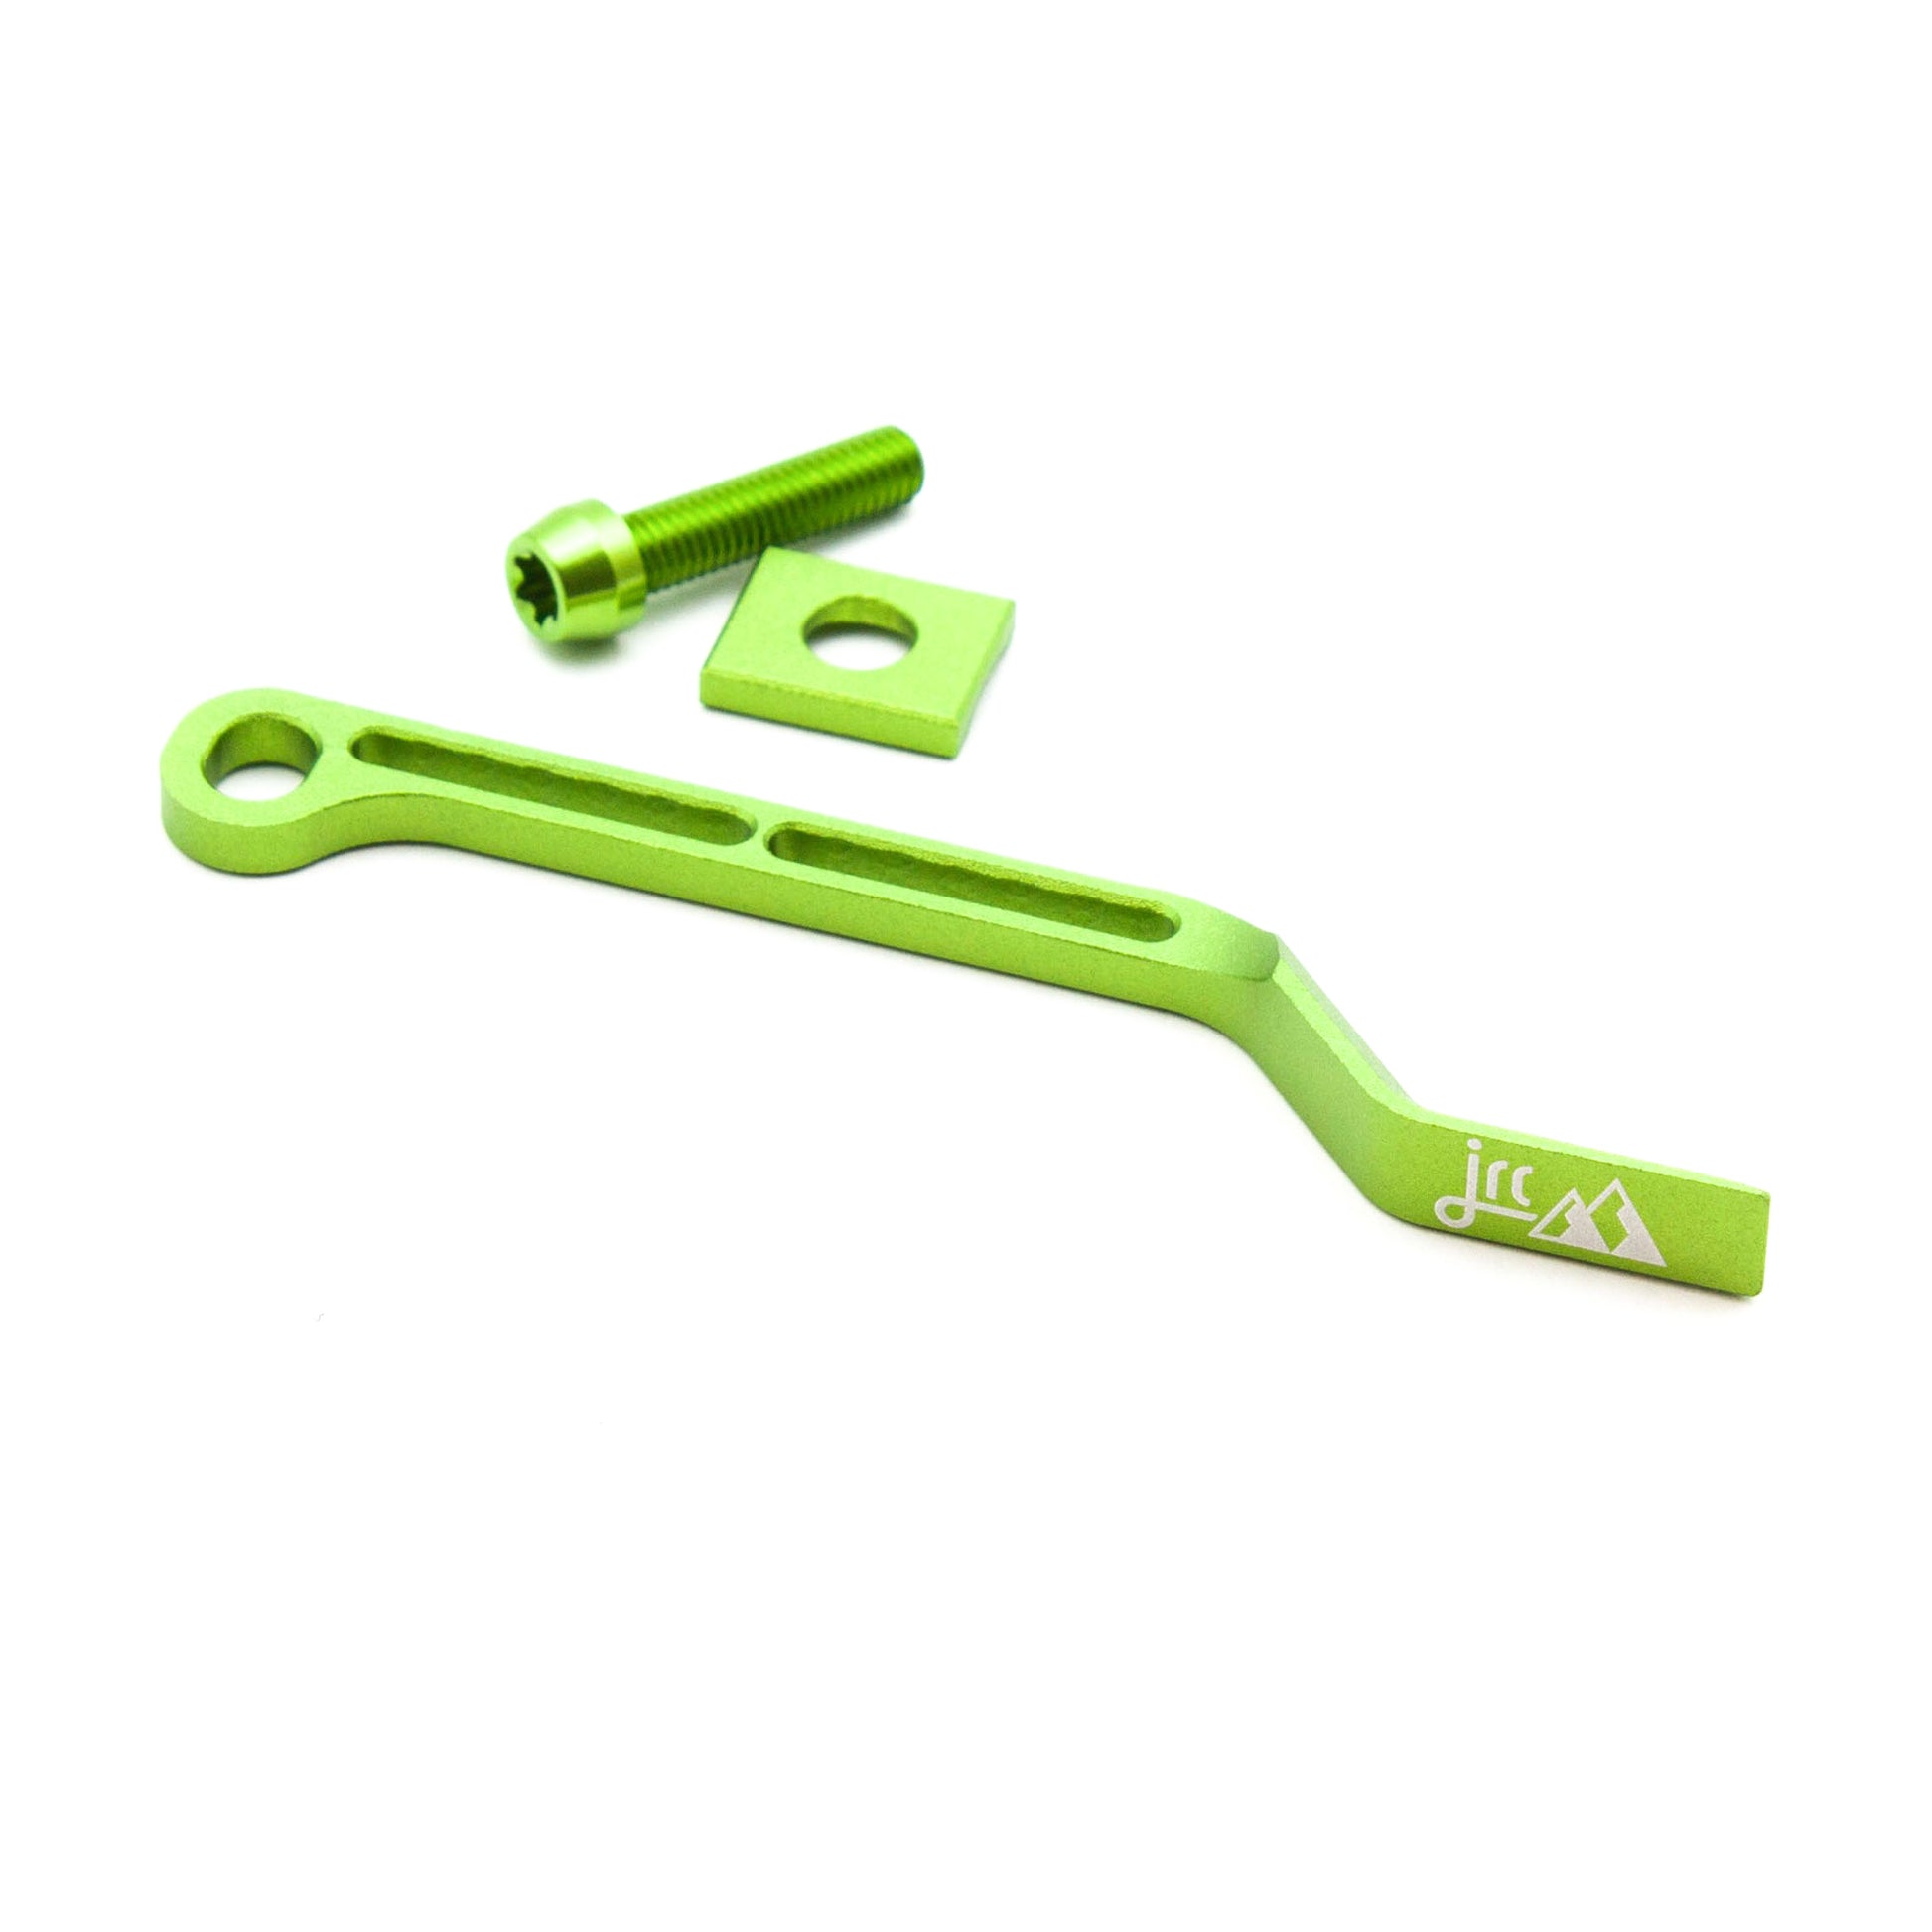 Acid green, lightweight aluminium bicycle chain catcher kit with alloy mounting bolts and braze-clamp spacer